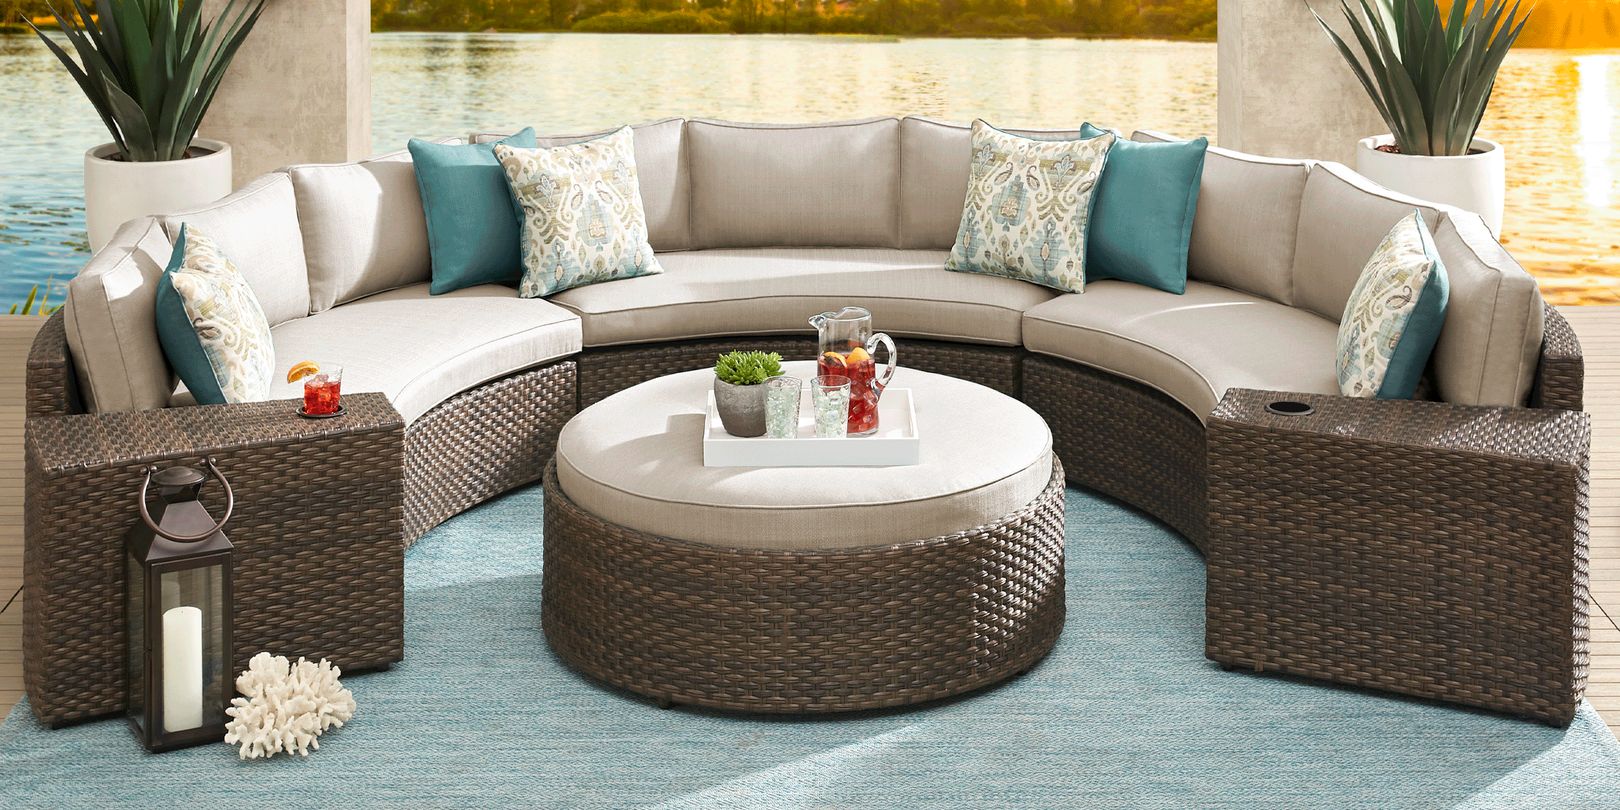 photo of modular curved brown wicker sectional with tan cushions and ottoman